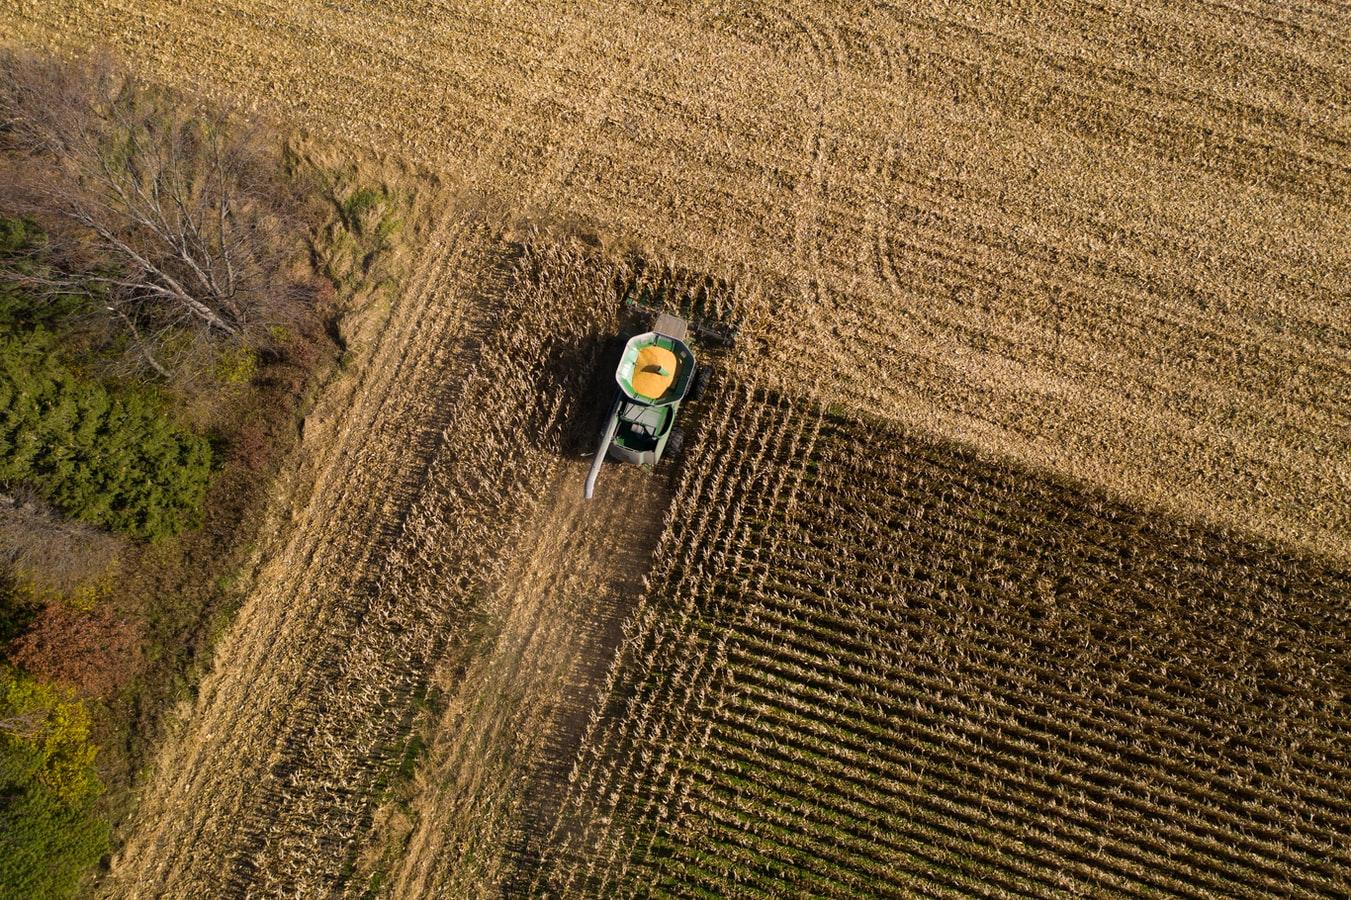 Aerial photo of a combine harvesting corn